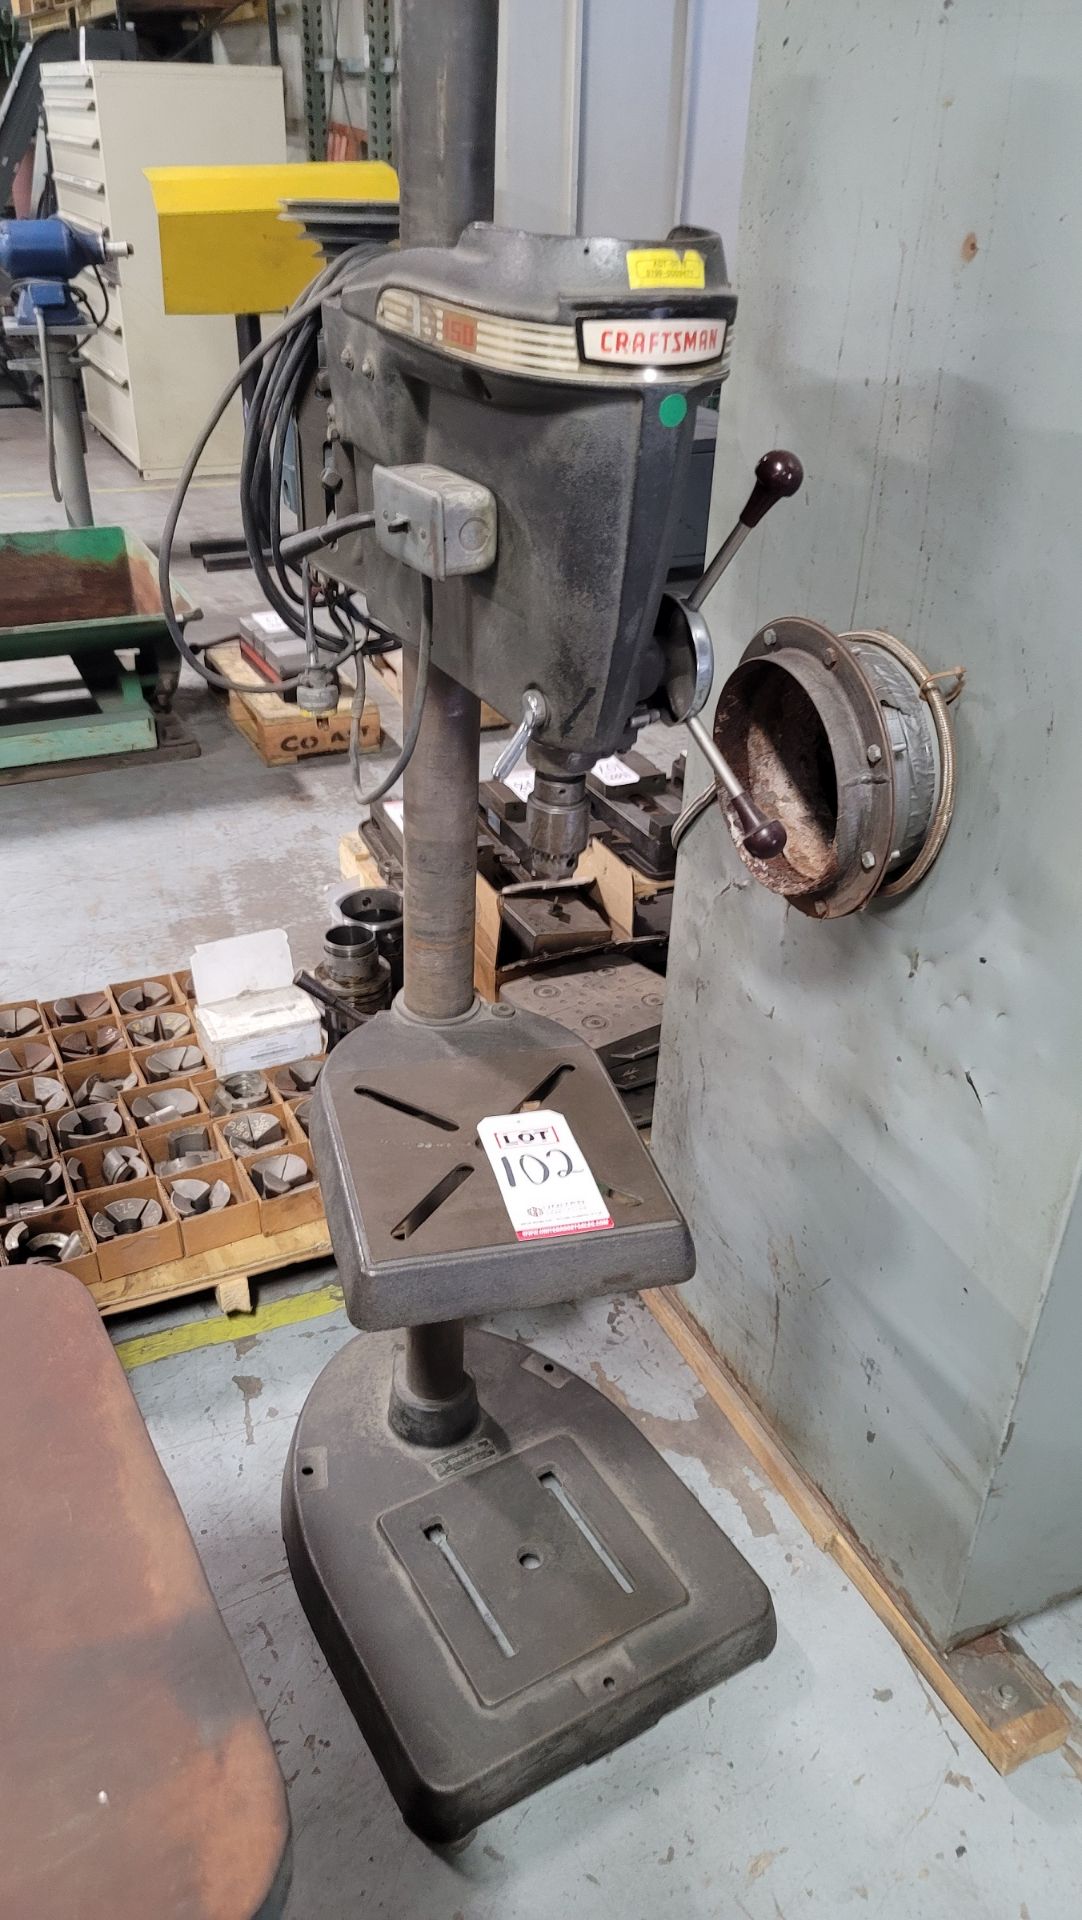 CRAFTSMAN FLOOR DRILL PRESS, MODEL 150, **IMMEX REGISTERED EQUIPMENT (NEEDS TO RETURN TO THE US)